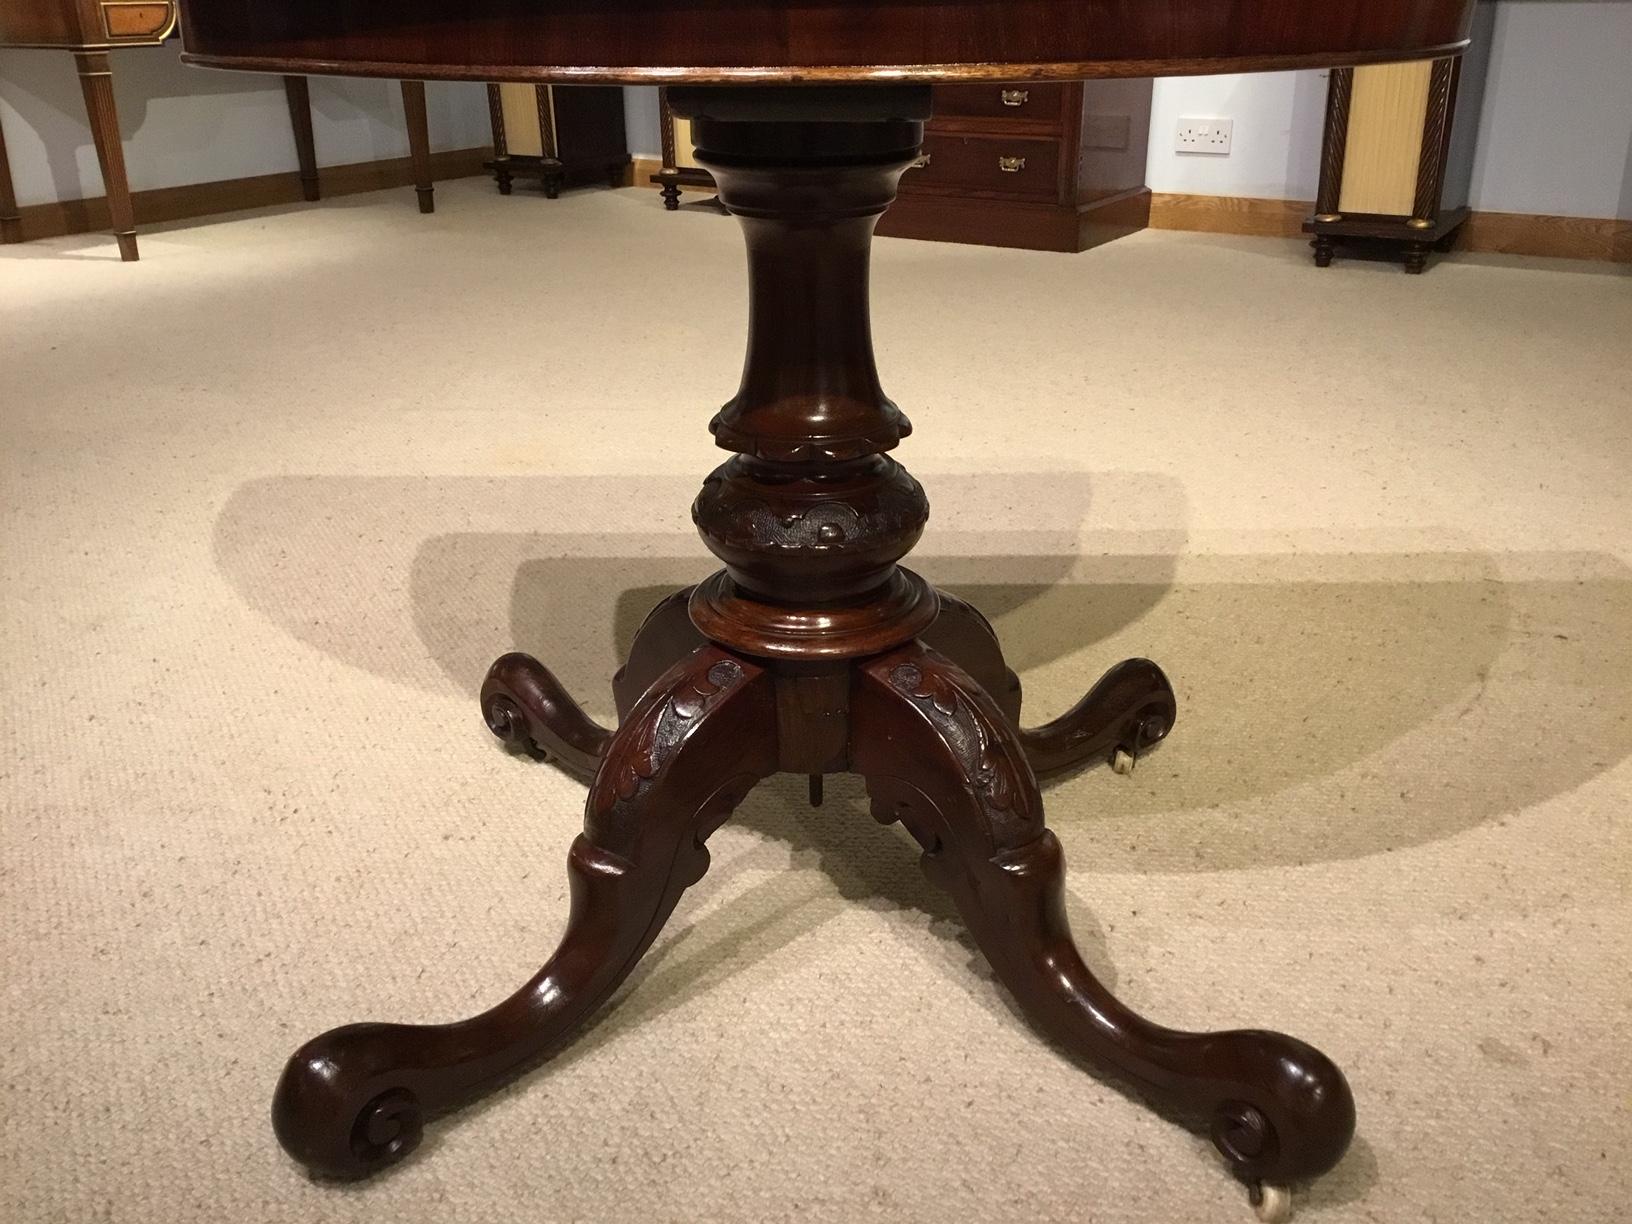 A burr walnut Victorian Period fold over card table. The demilune top is veneered in beautifully figured burr walnut and opens to reveal a baize playing surface with a walnut border. Supported on a turned and carved column with four acanthus carved